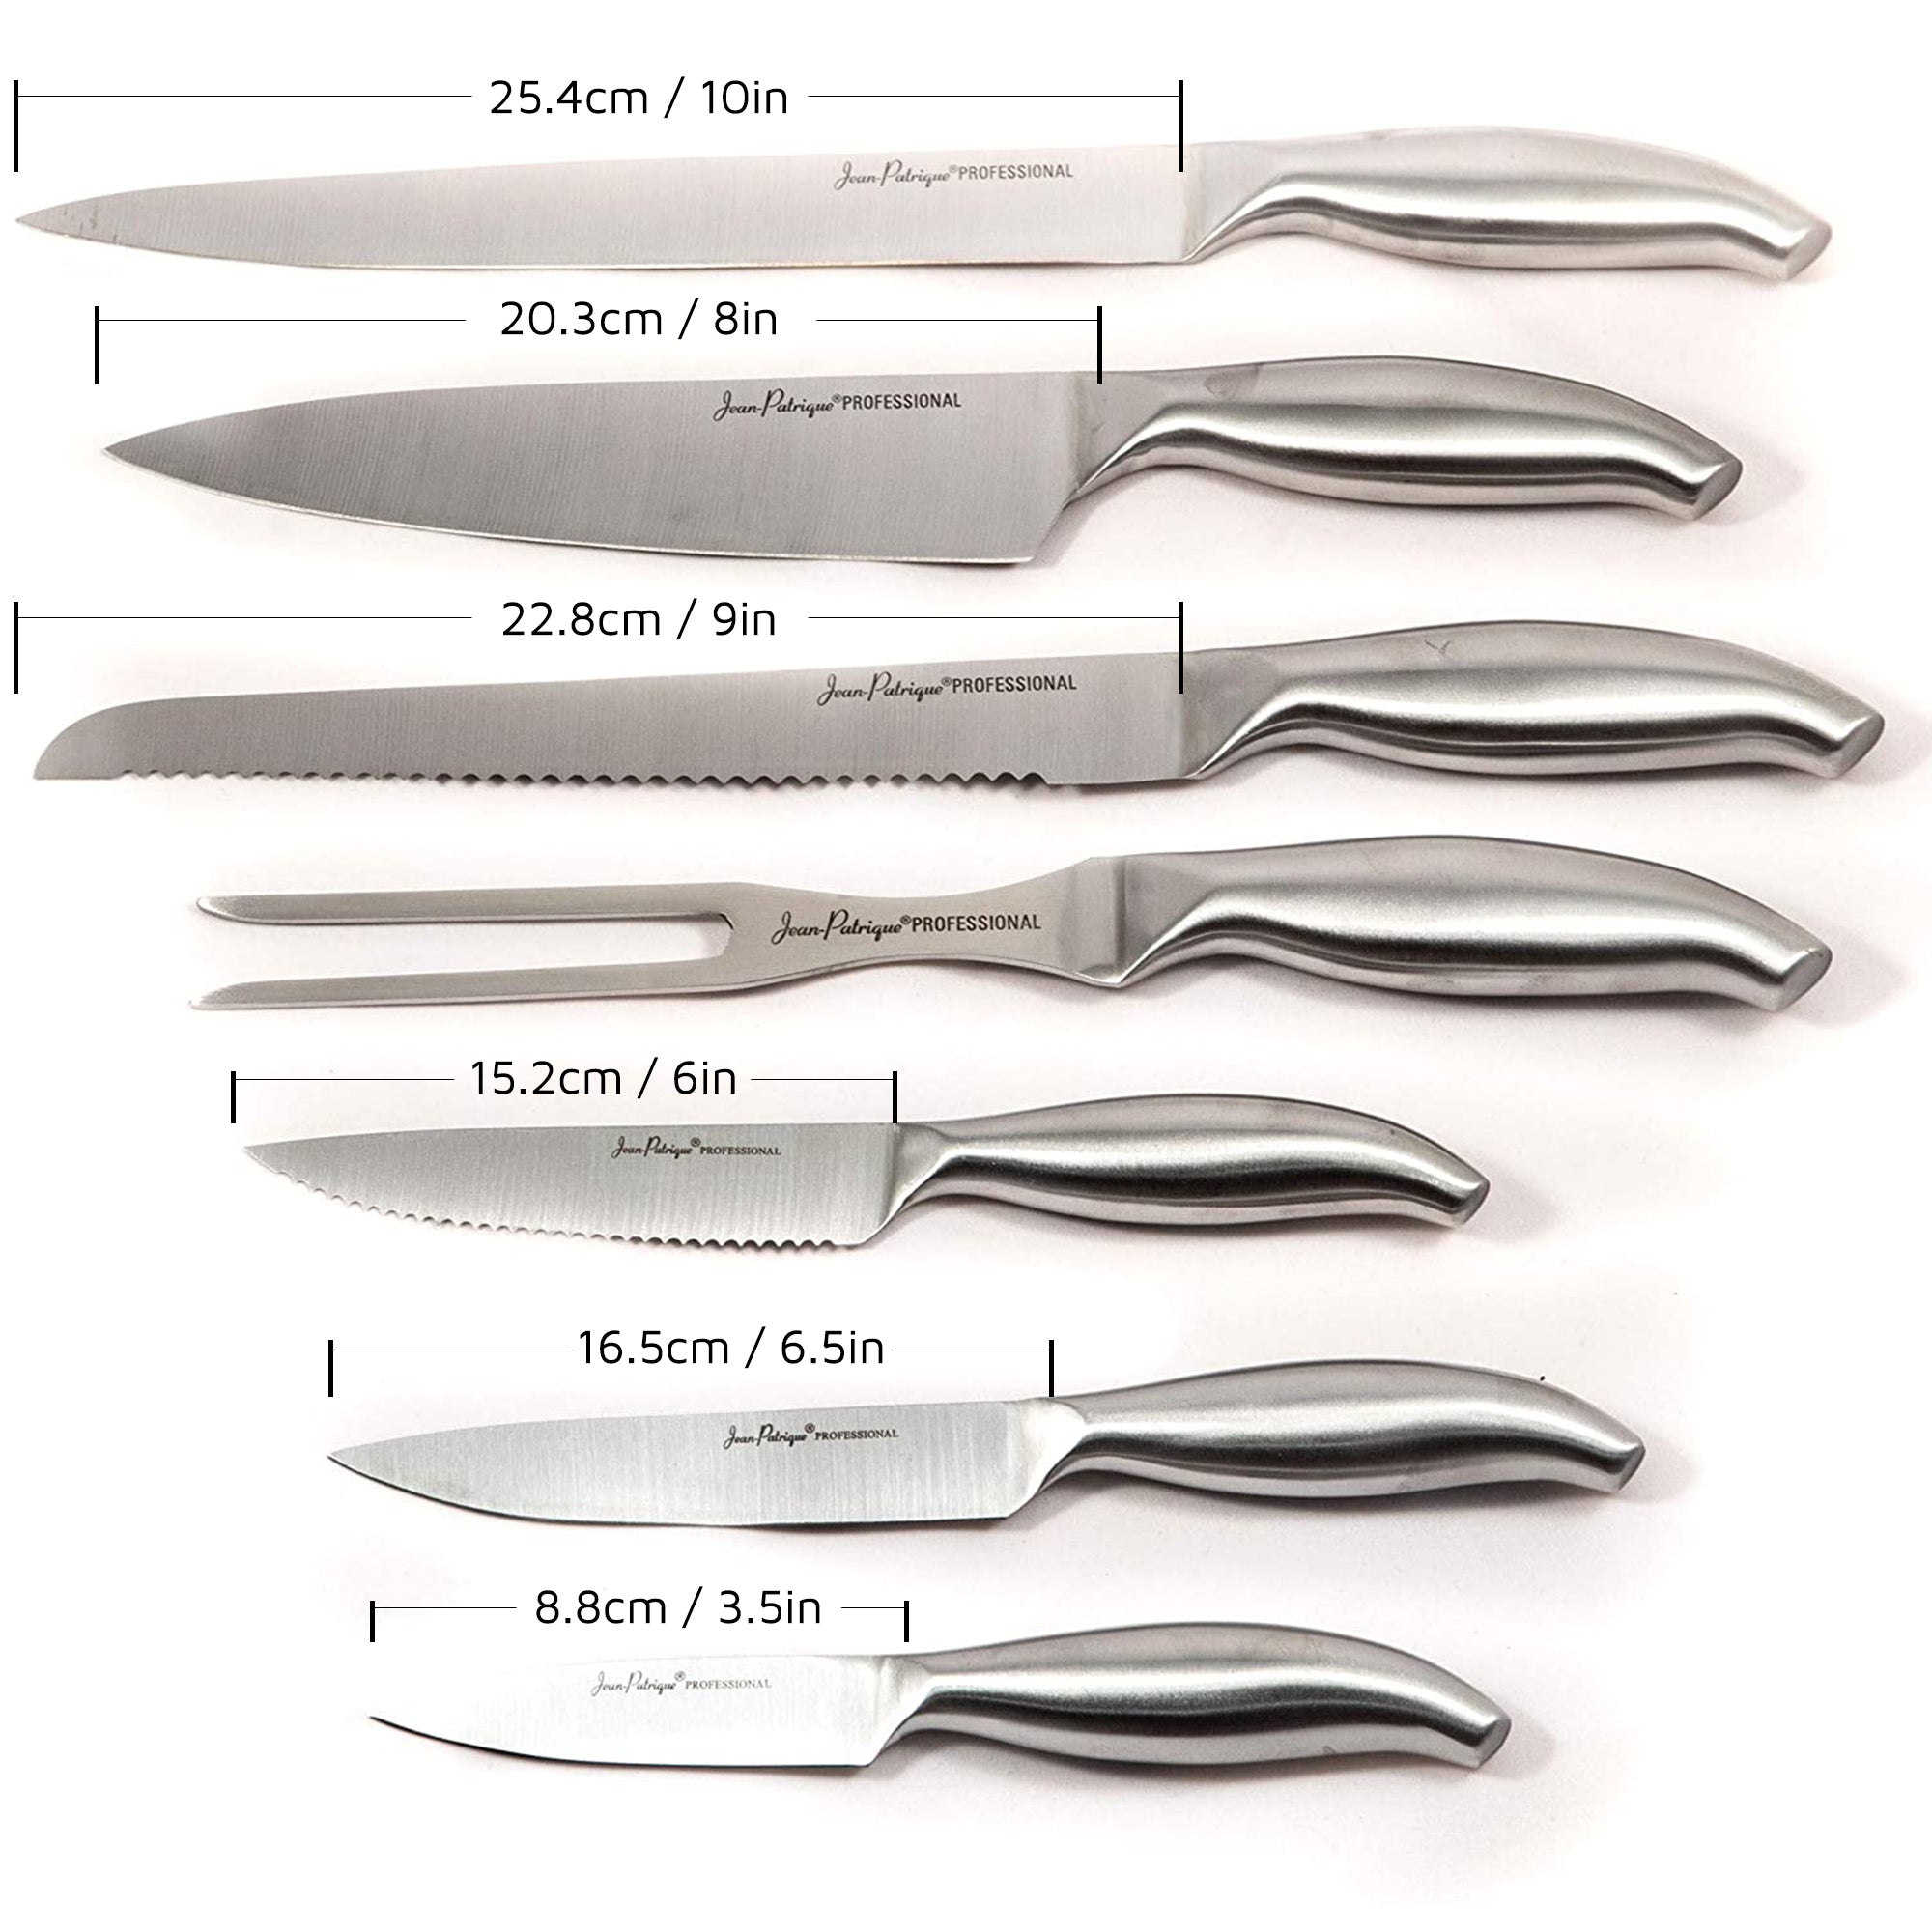 7-Piece Soft Grip Non-Stick Knife Set with Wood Block – Lord & Taylor